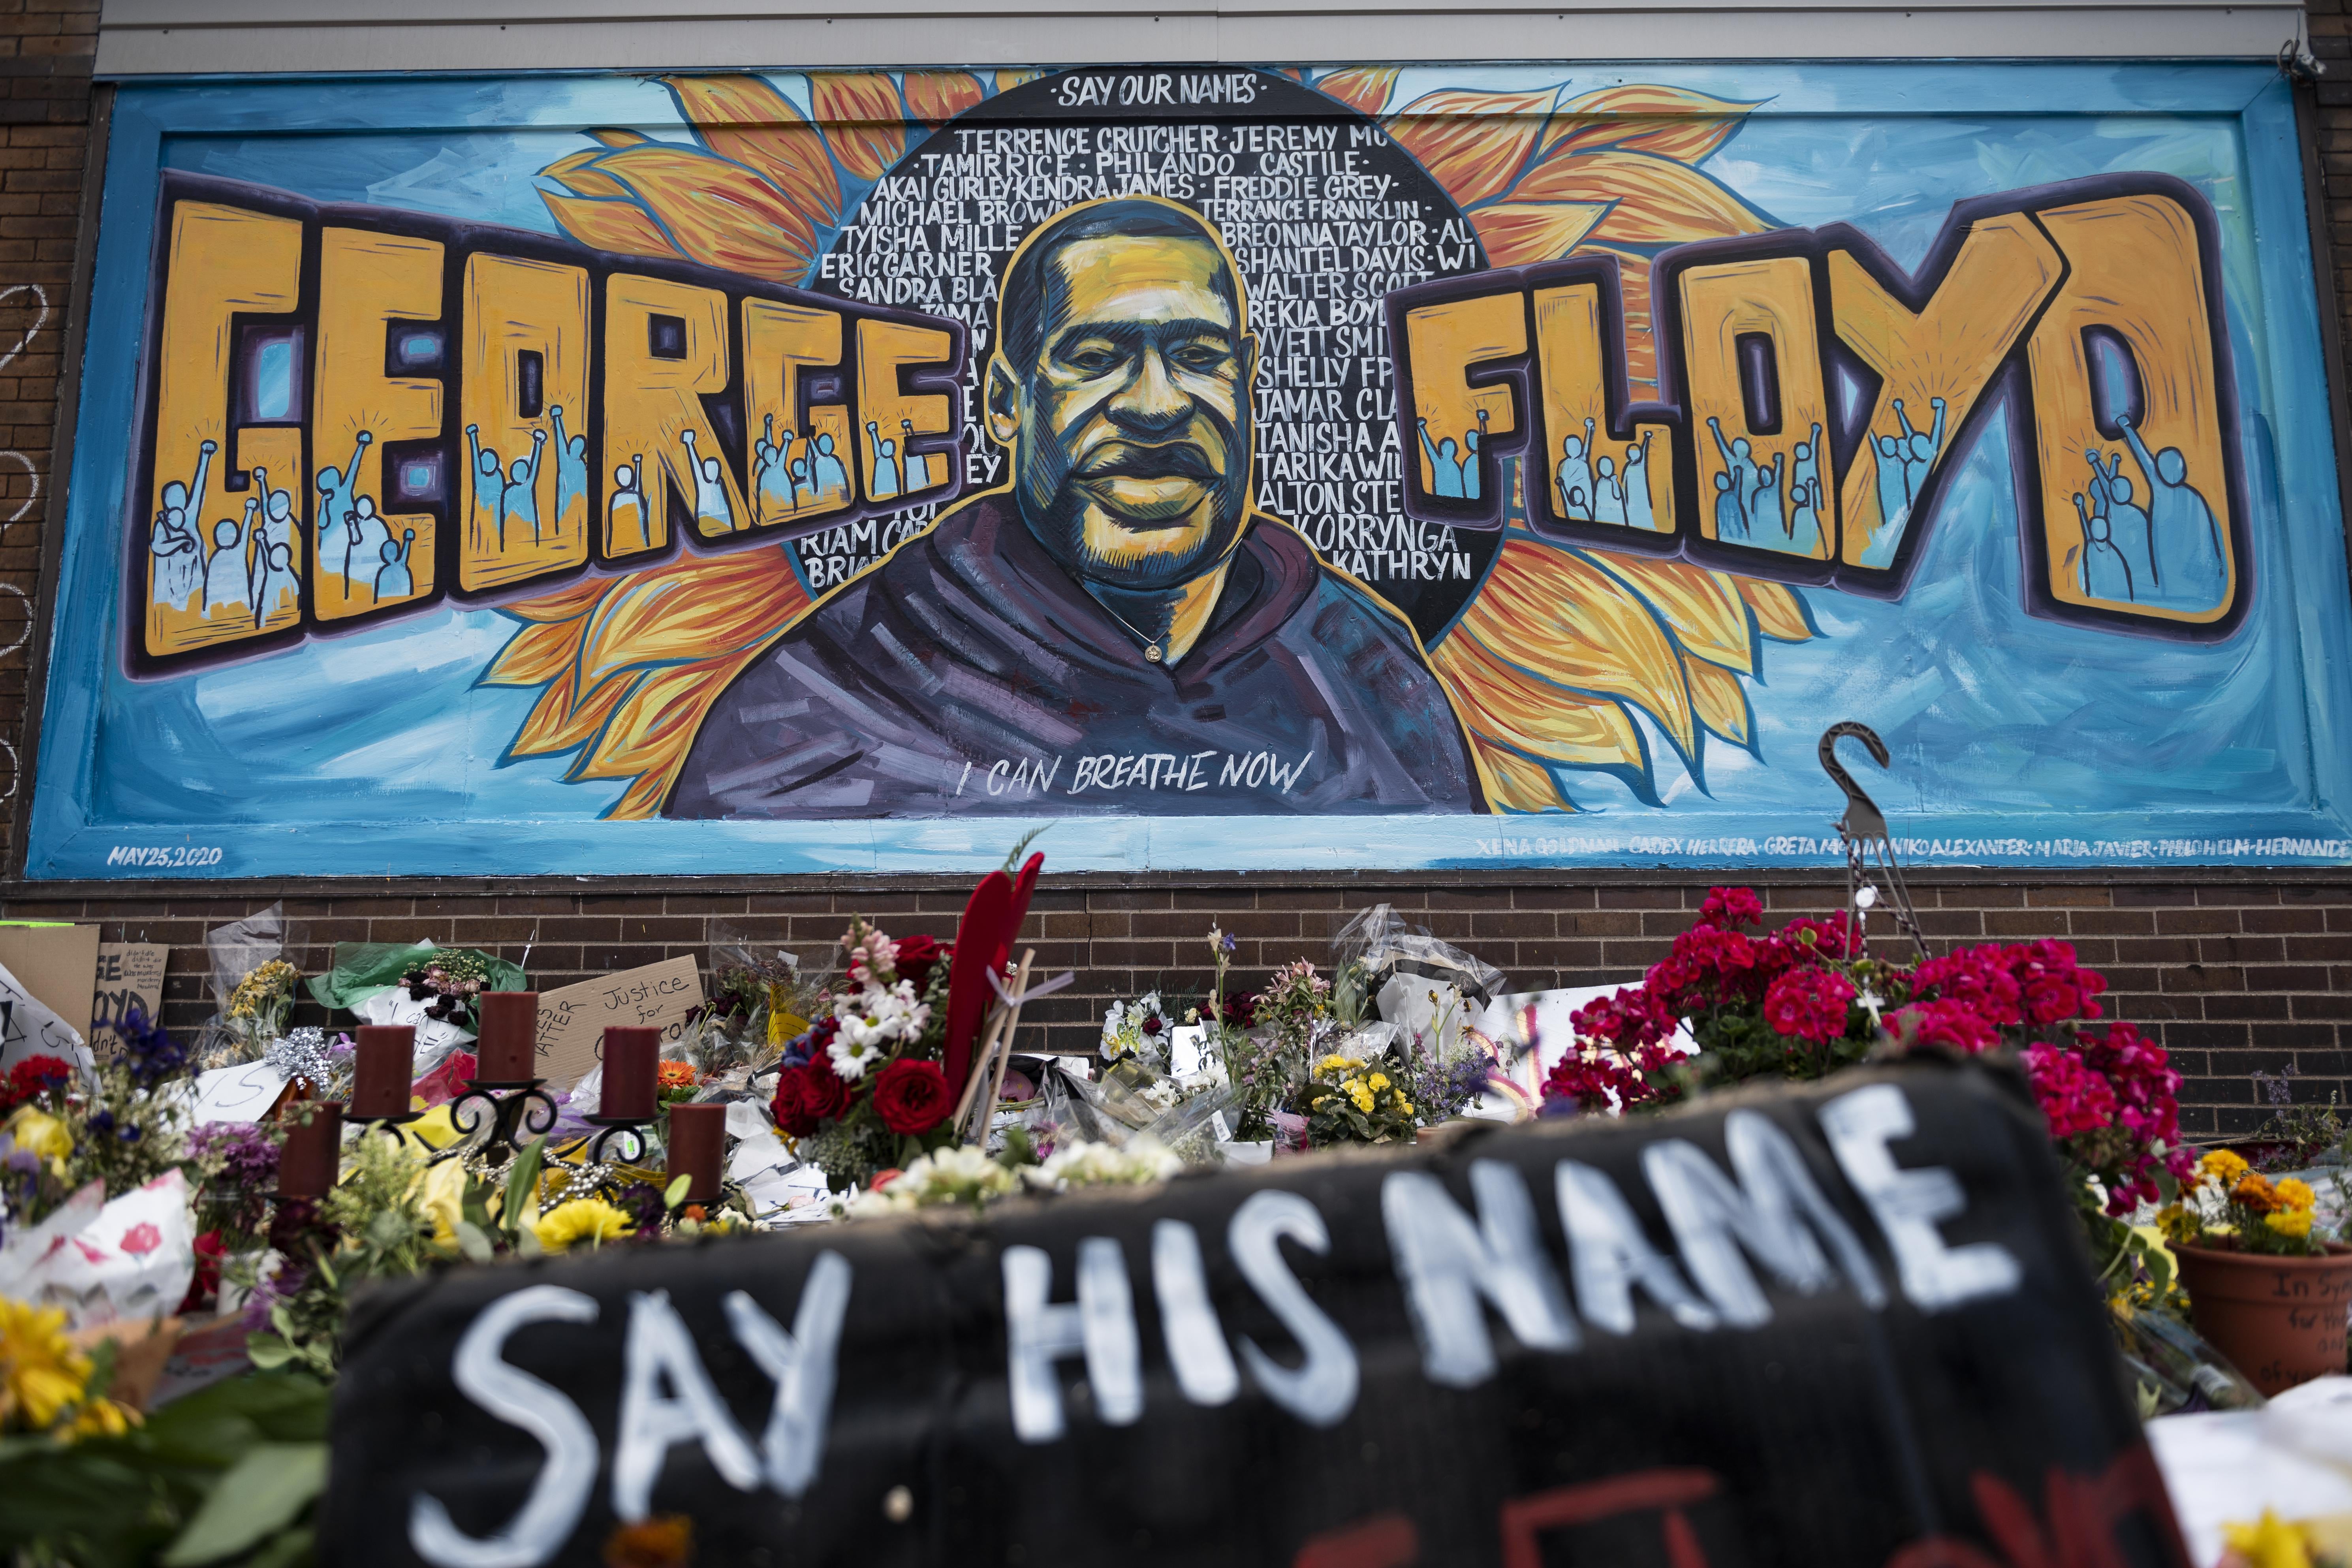 A mural with George Floyd's face and name is seen. Flowers stand below it along with a spray-painted cloth that says "Say His Name."